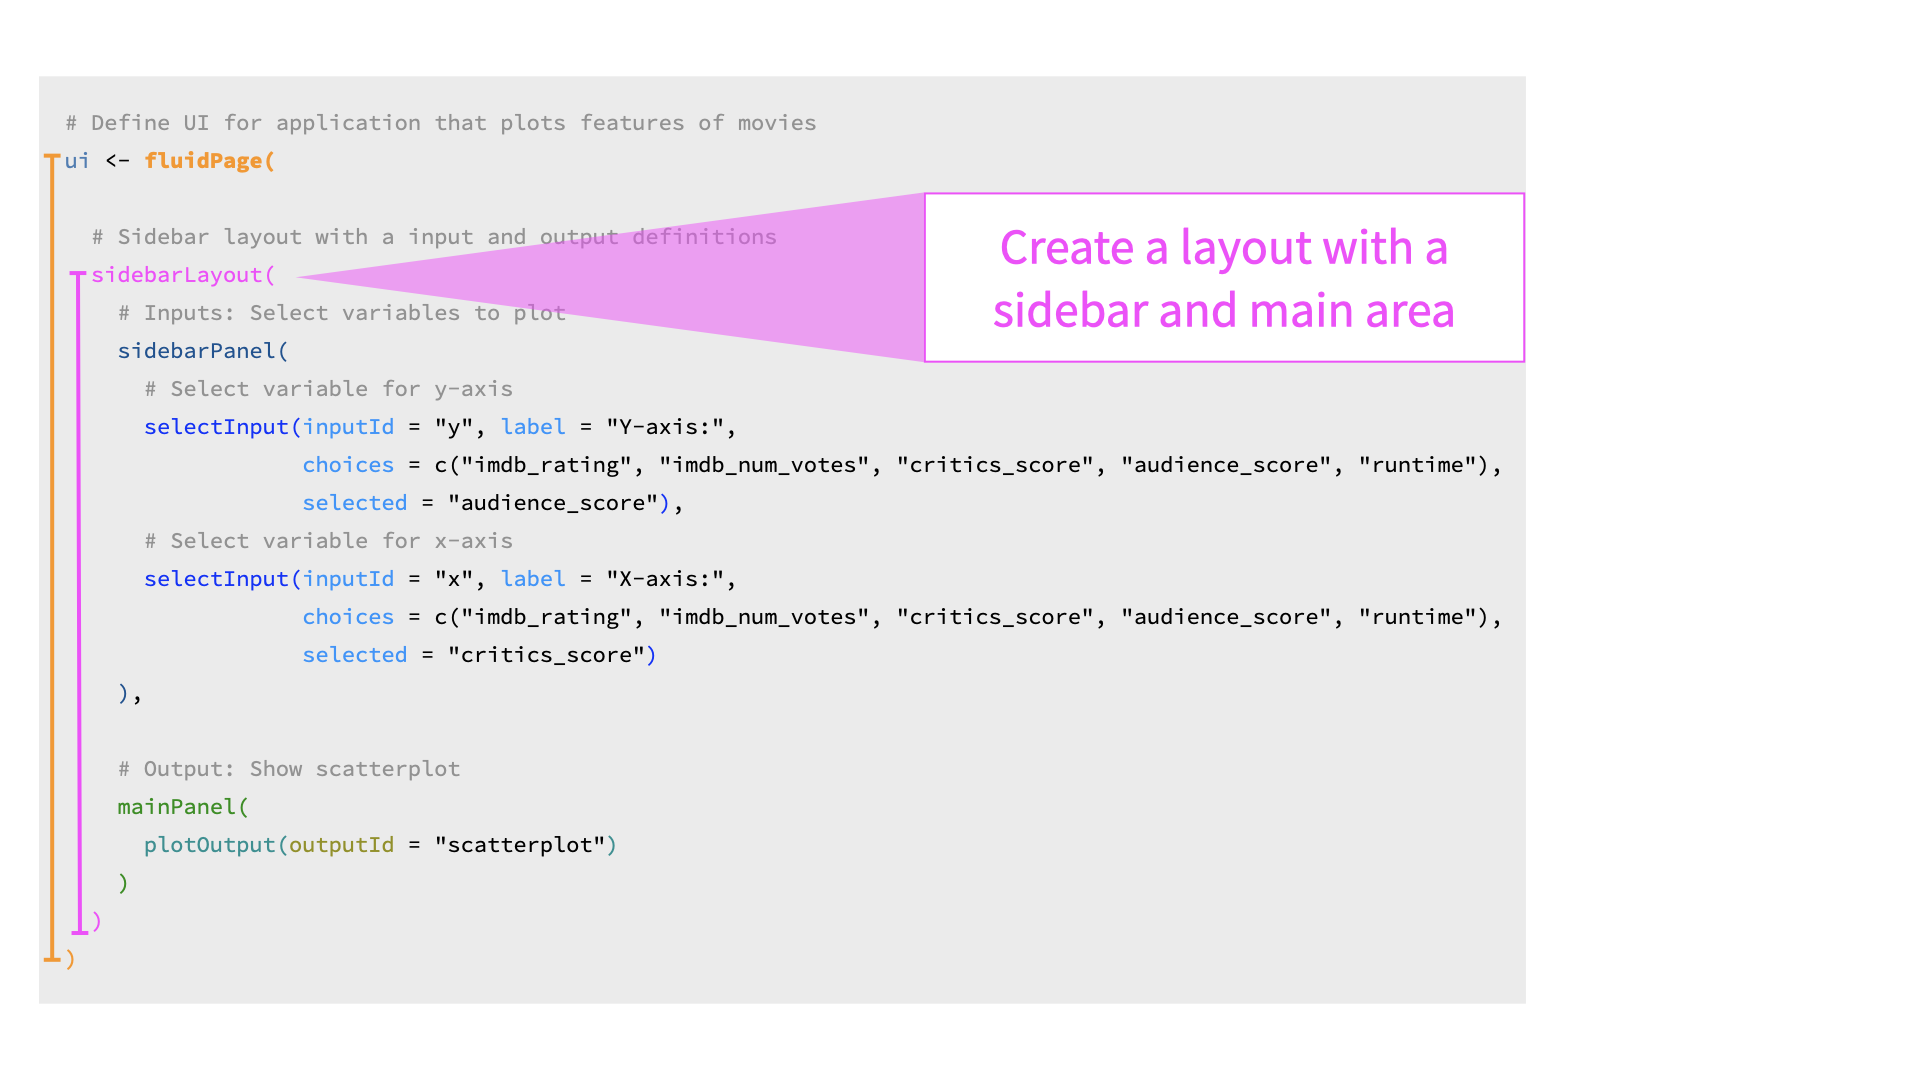 Arrow pointing to the section of the code that says 'sidebar_layout{' and says Create a layout with a sidebar and main area.